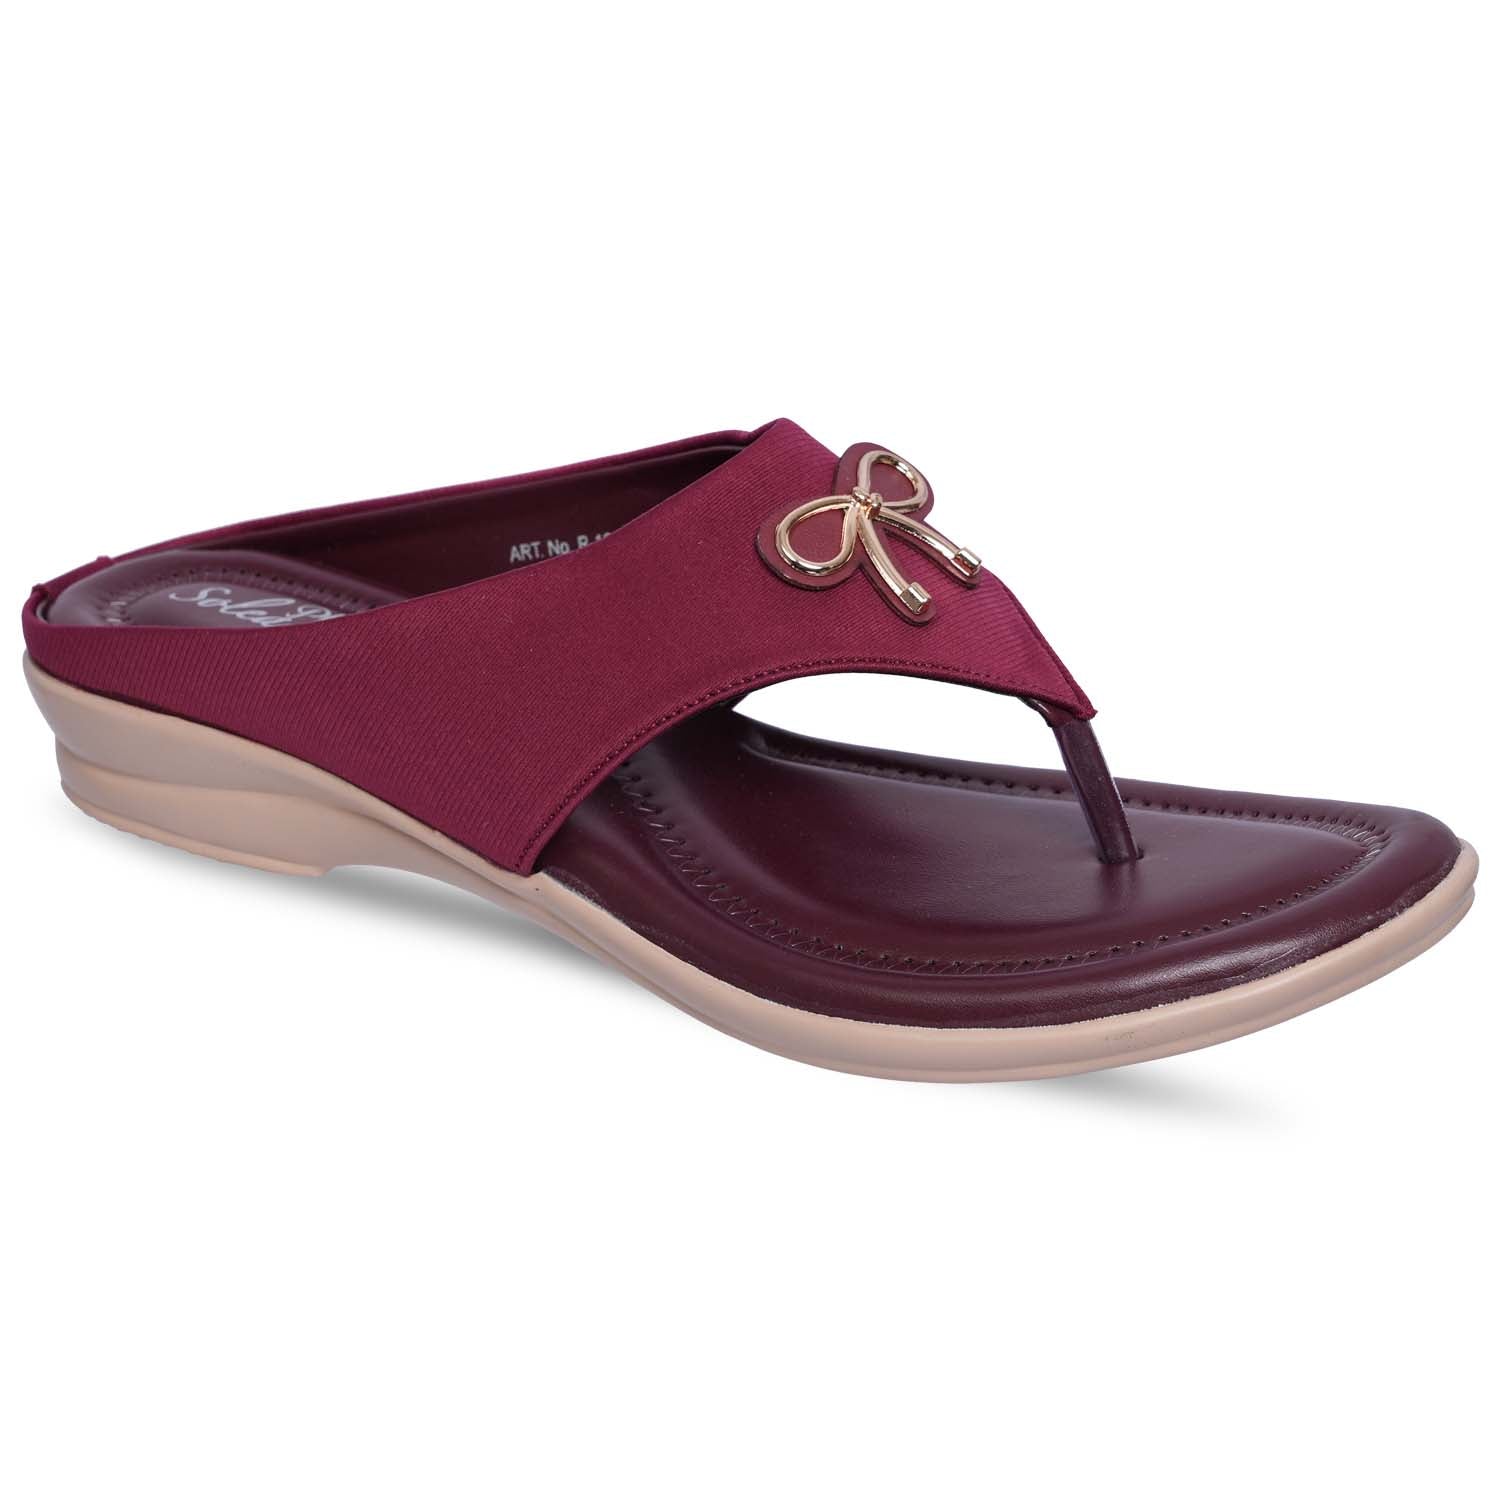 Paragon R1013L Women Sandals | Casual &amp; Formal Sandals | Stylish, Comfortable &amp; Durable | For Daily &amp; Occasion Wear